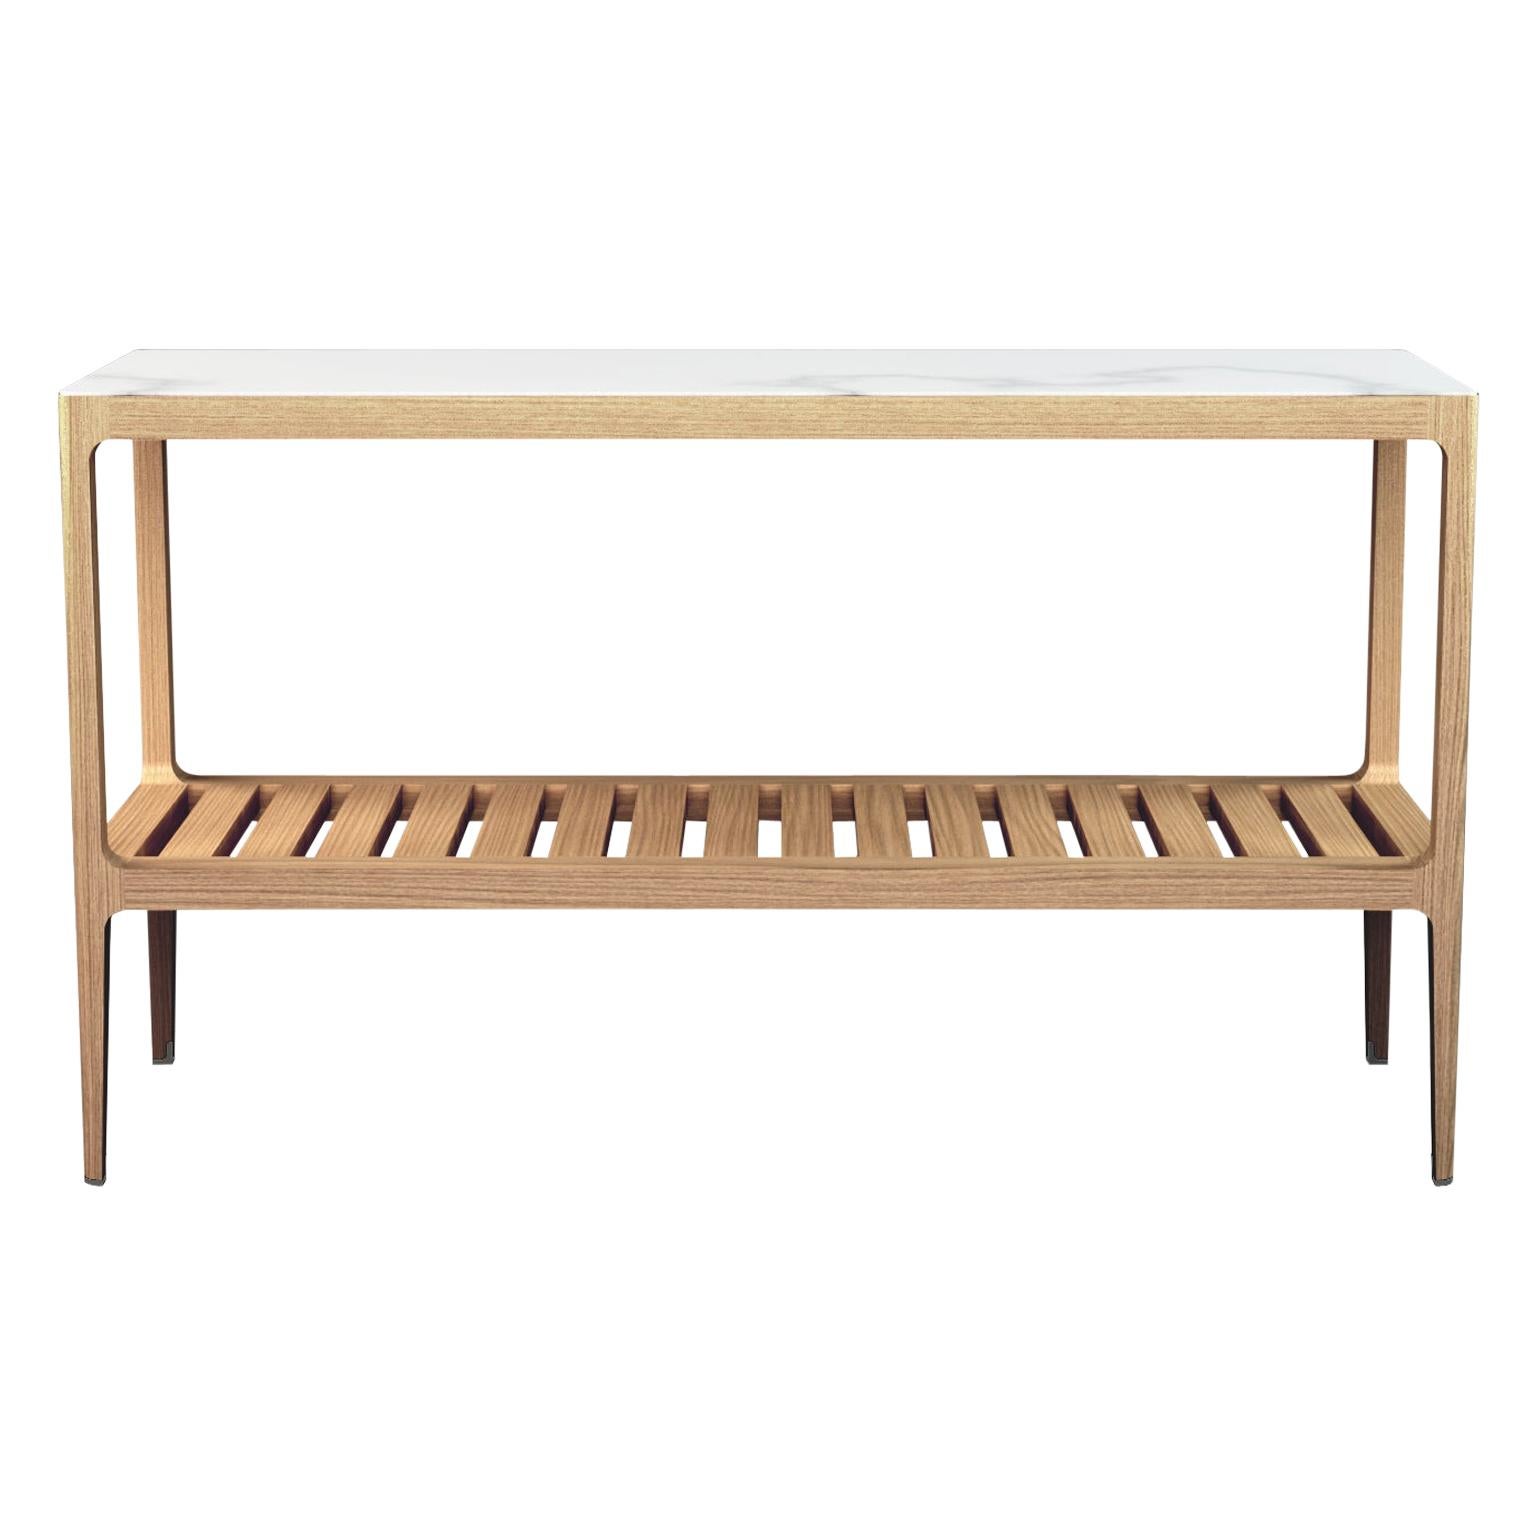 Customizable Radius Oak Console Table with Slatted Shelf by Munson Furniture For Sale